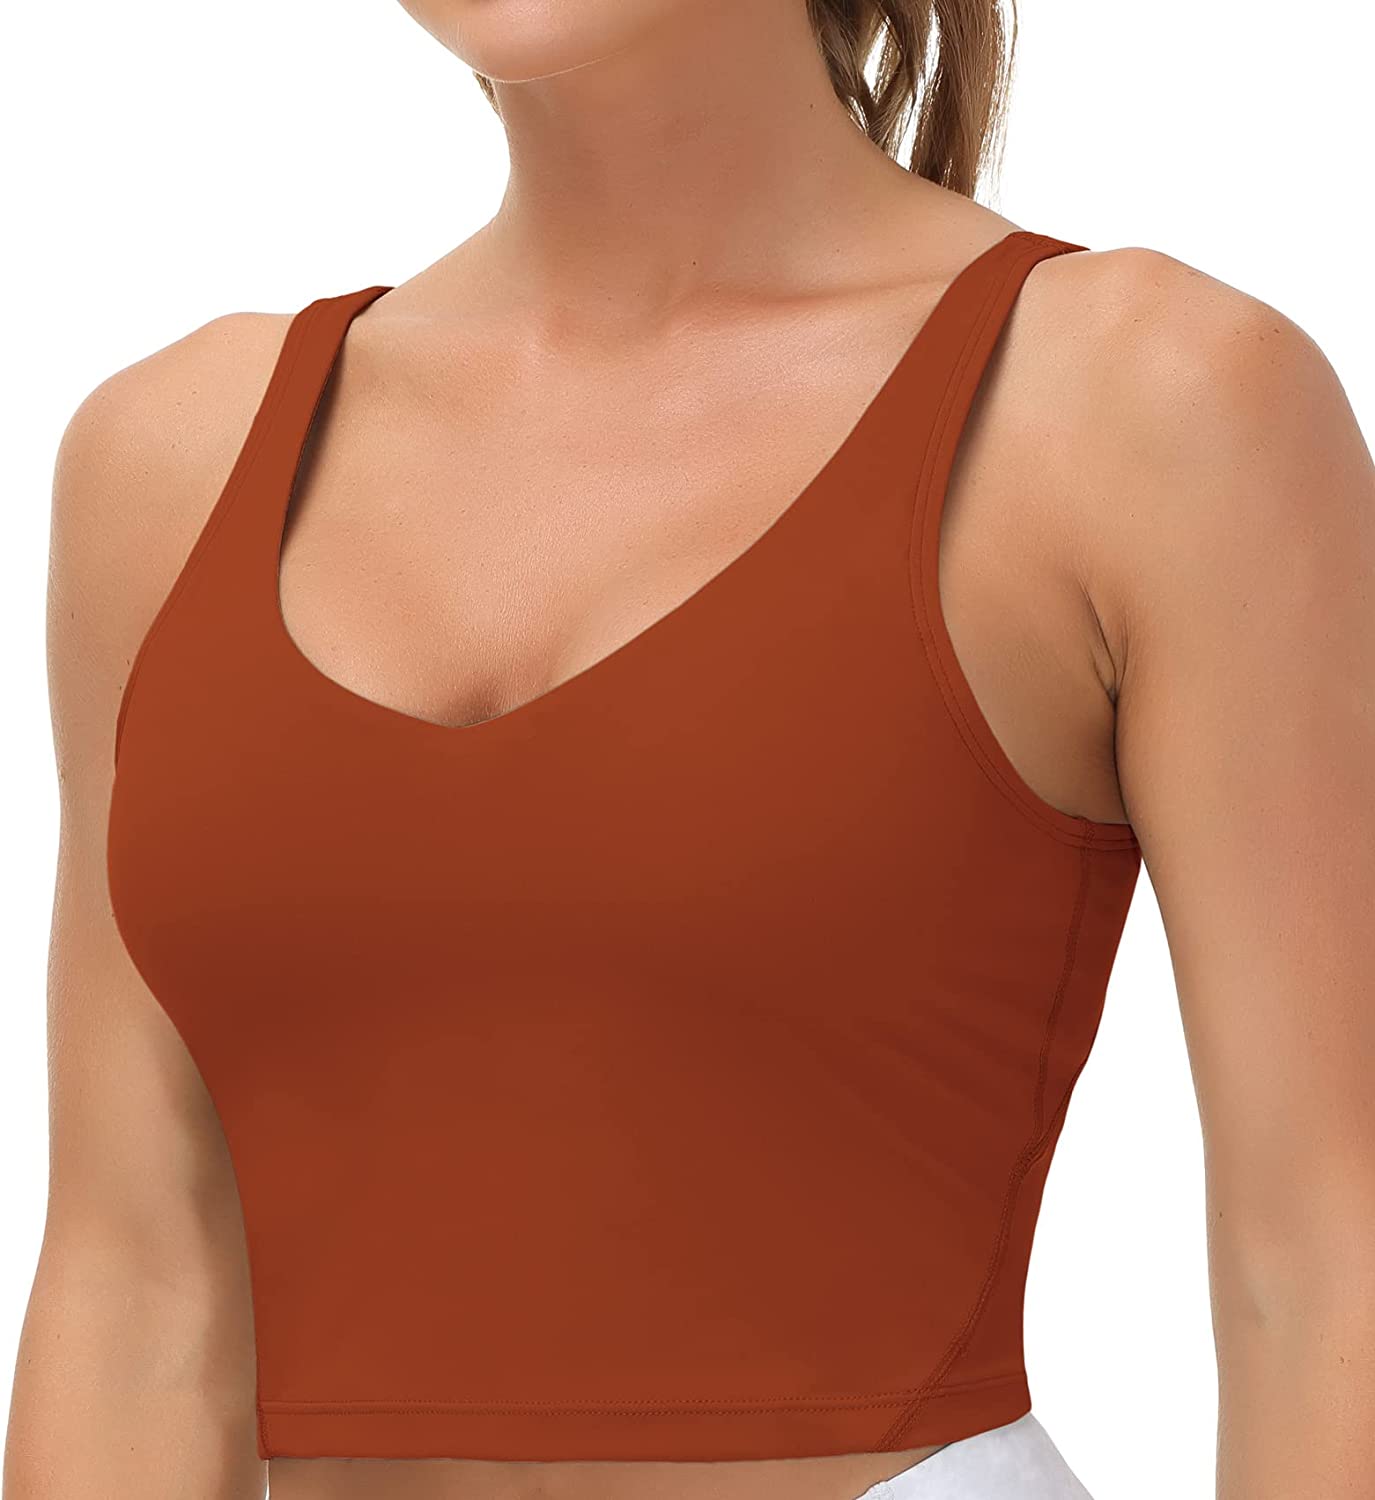  Tops, The Gym People Longline Wirefree Padded Sports Bra Tank  Medium Support